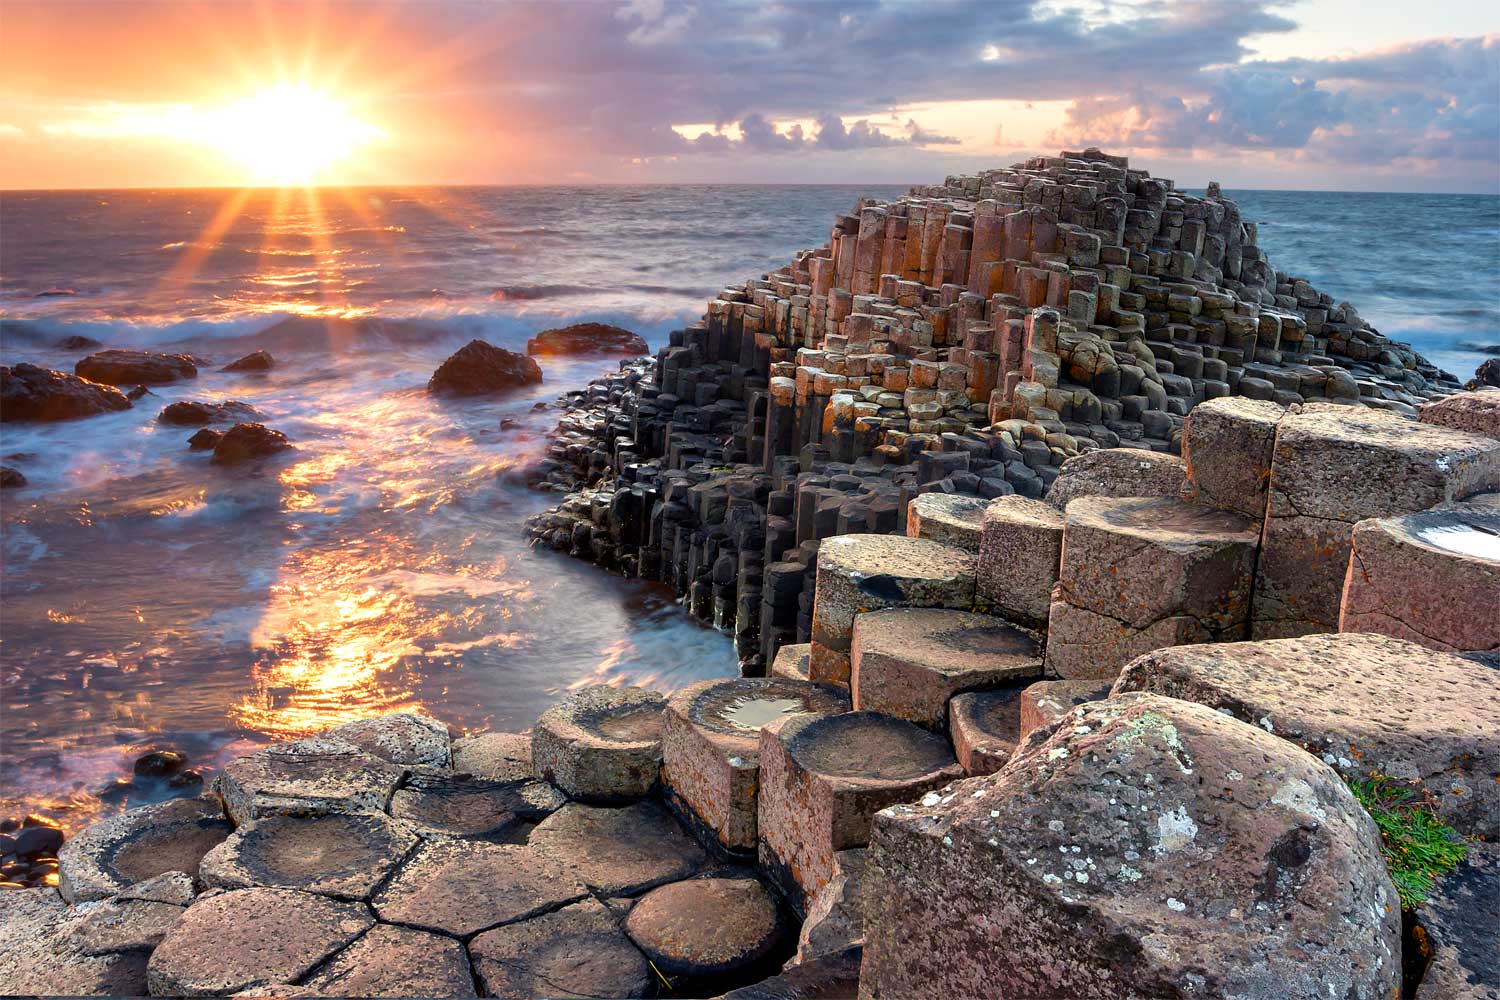 The Giants Causeway one of the major tourist attractions of Northern Ireland & The Causeway Coast.